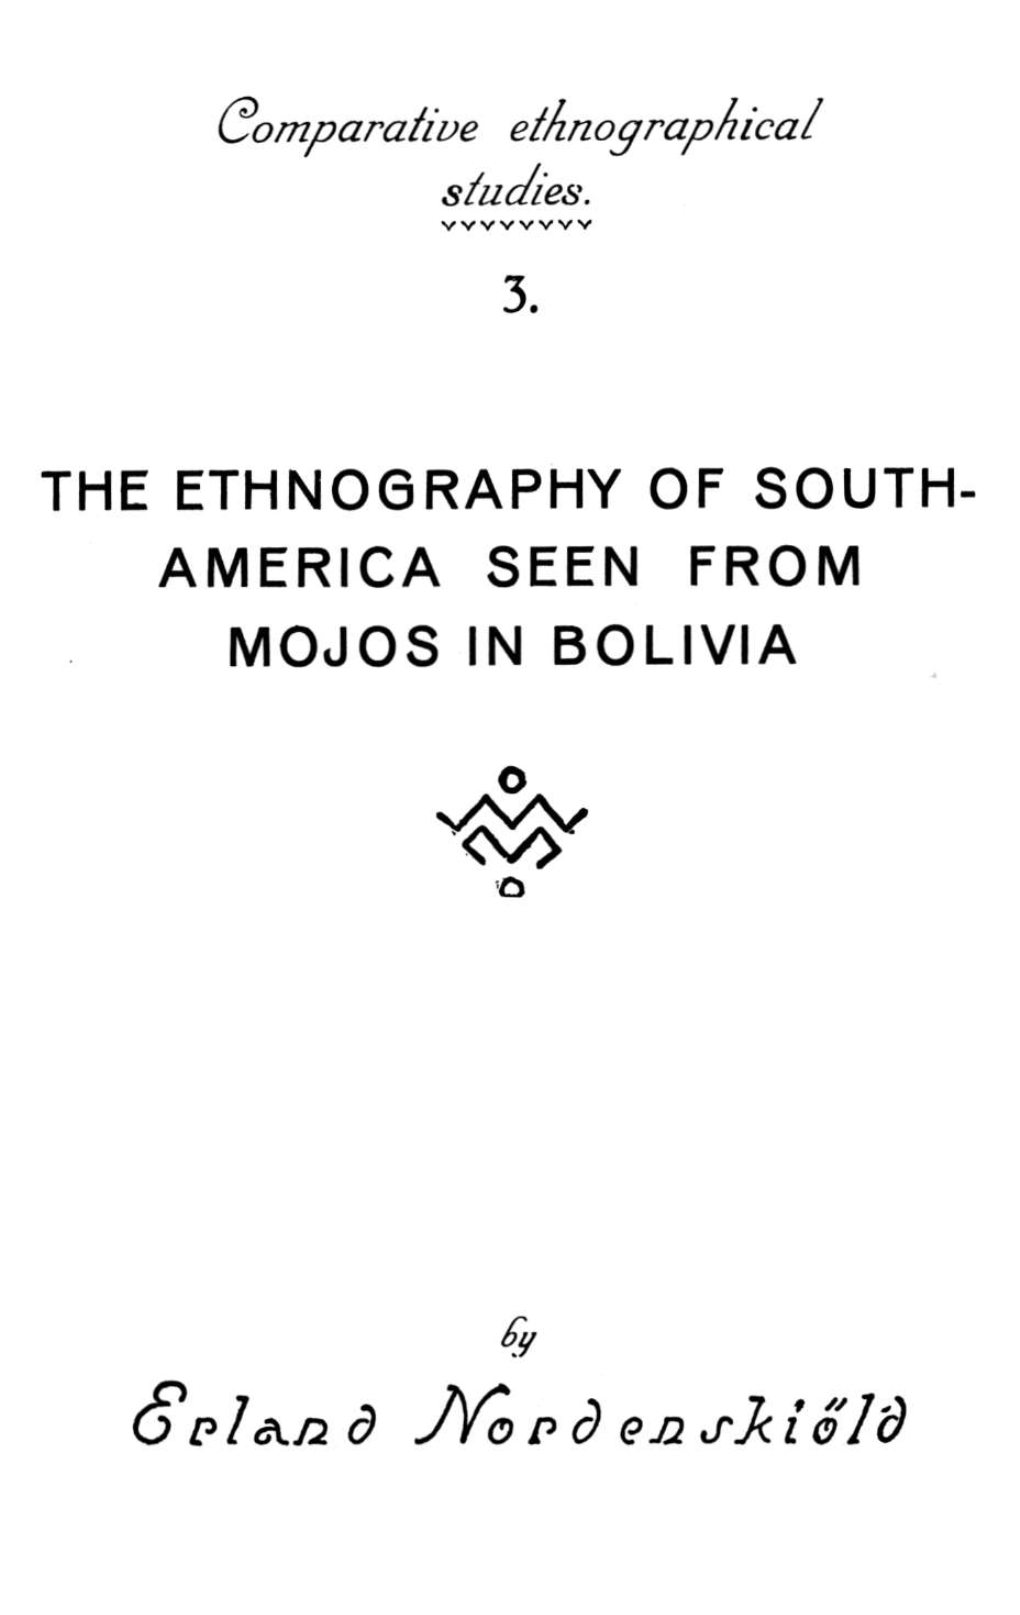 The Ethnography of South- America Seen from Mojos in Bolivia